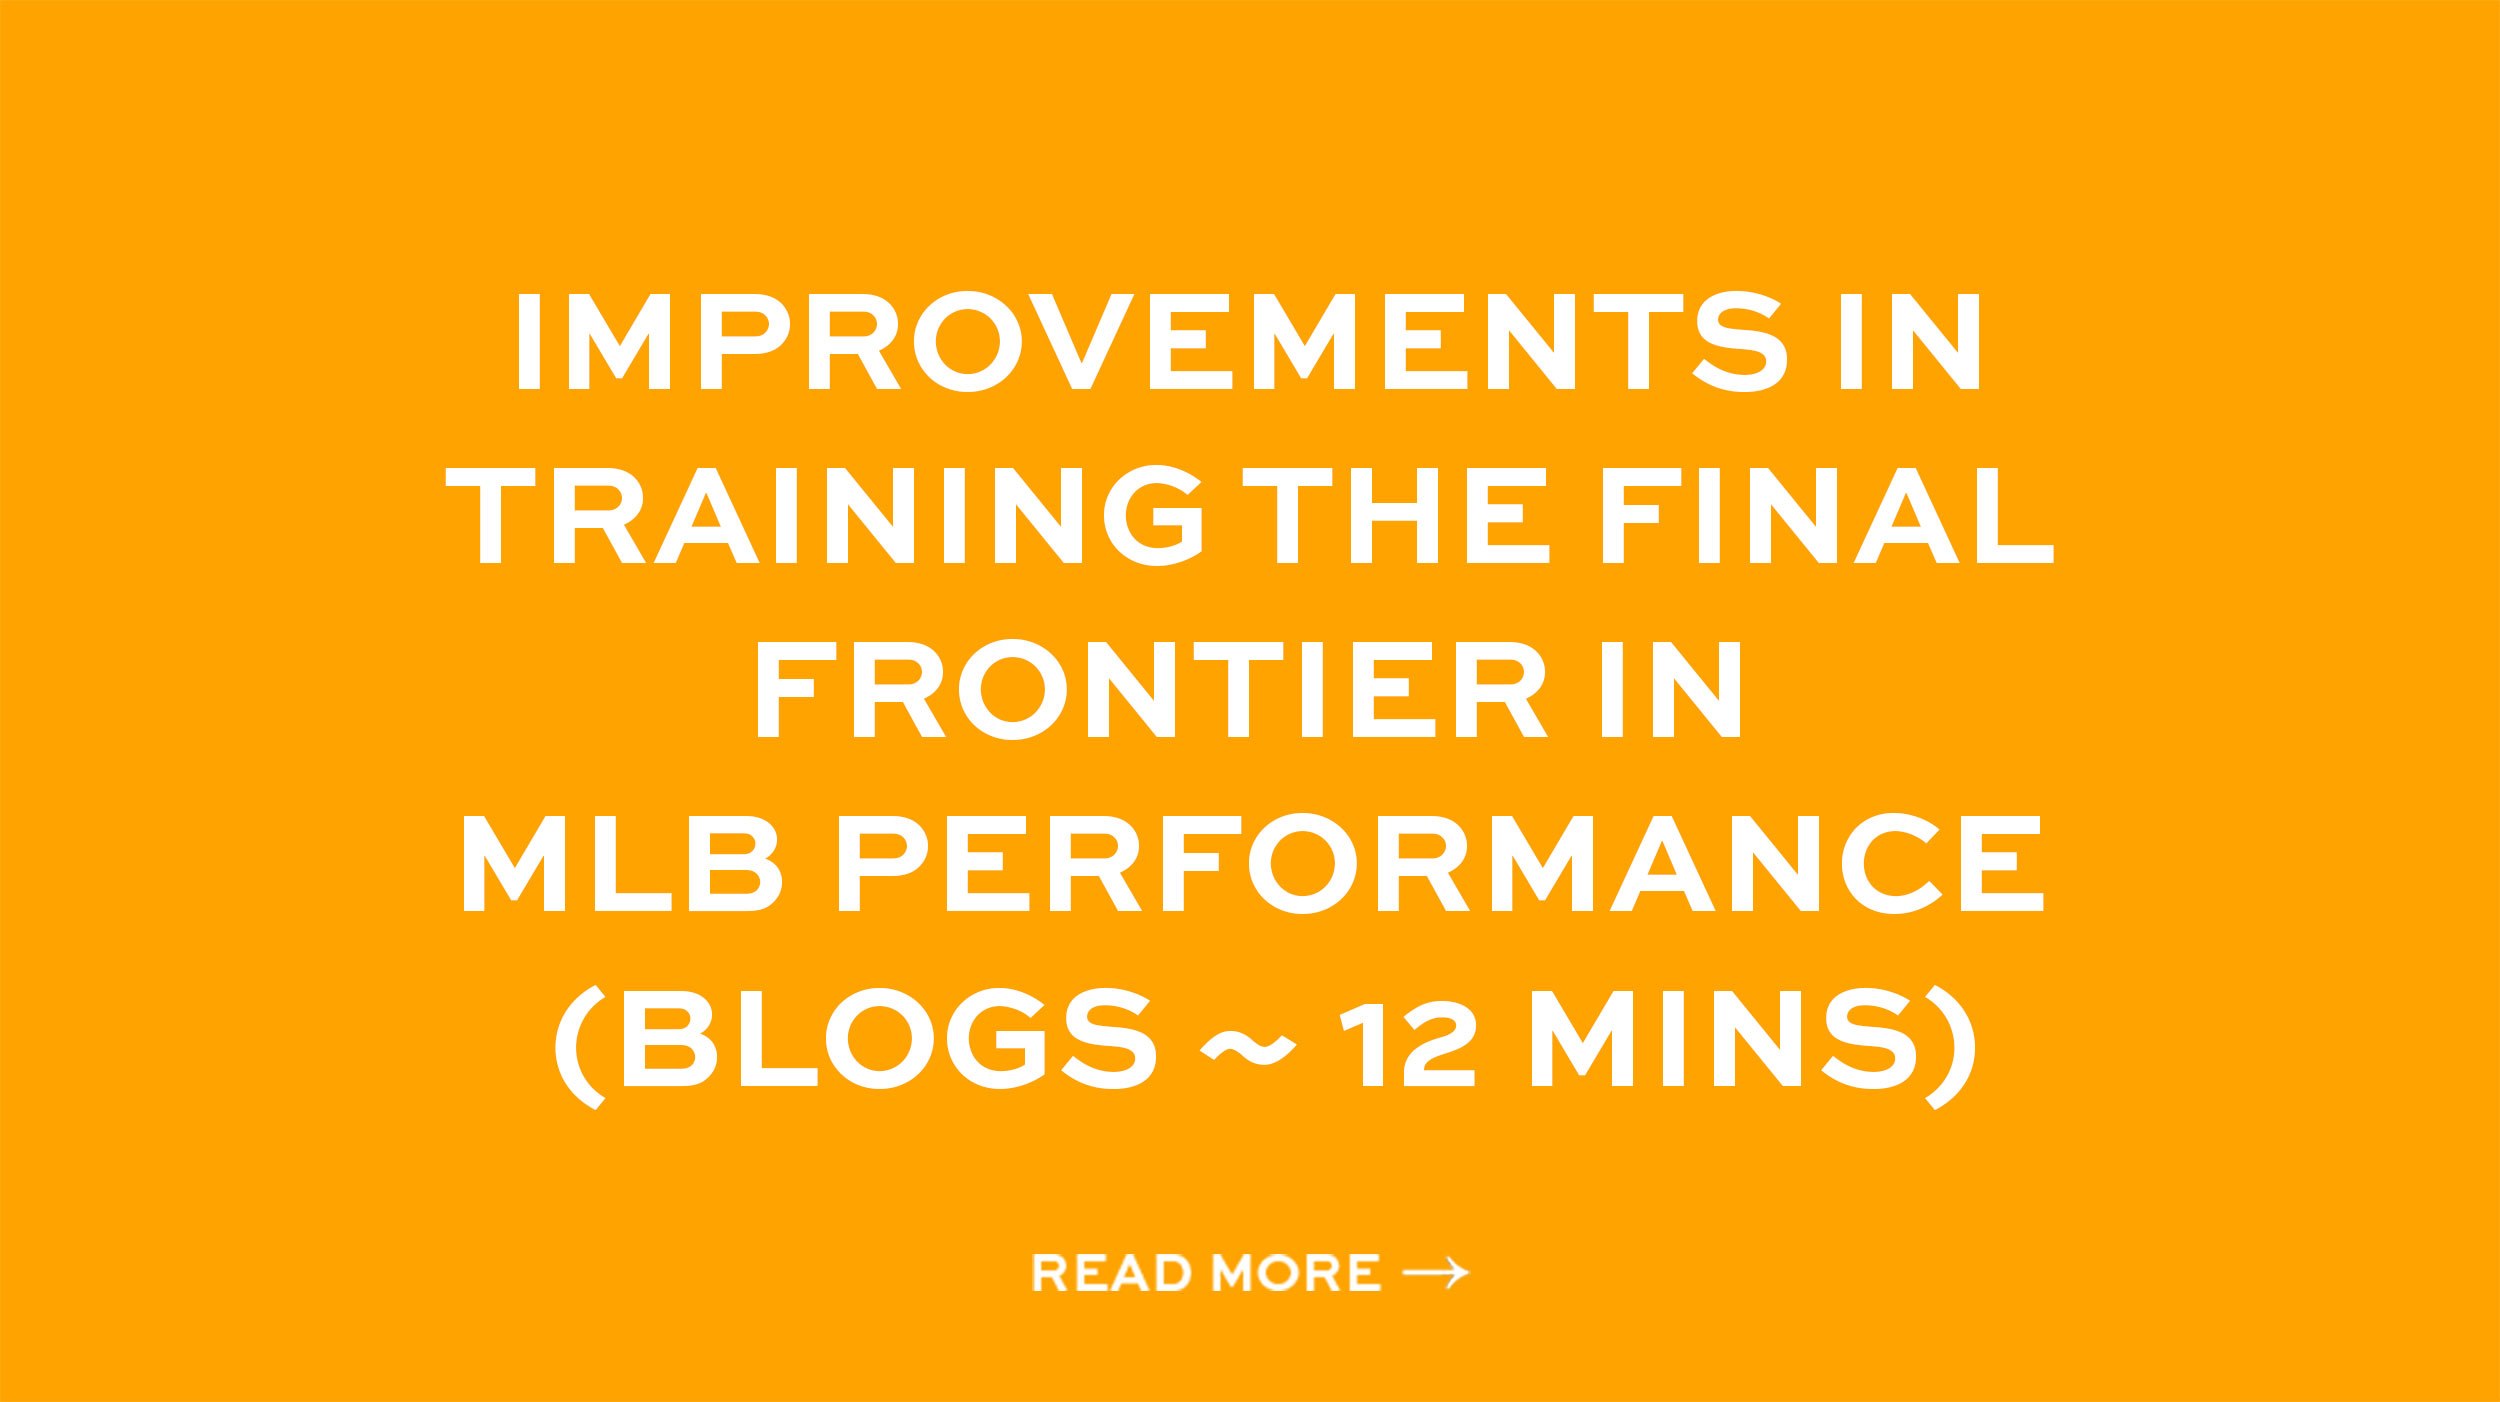 Improvements in training the final frontier in MLB performance (Blogs ~ 12 mins)